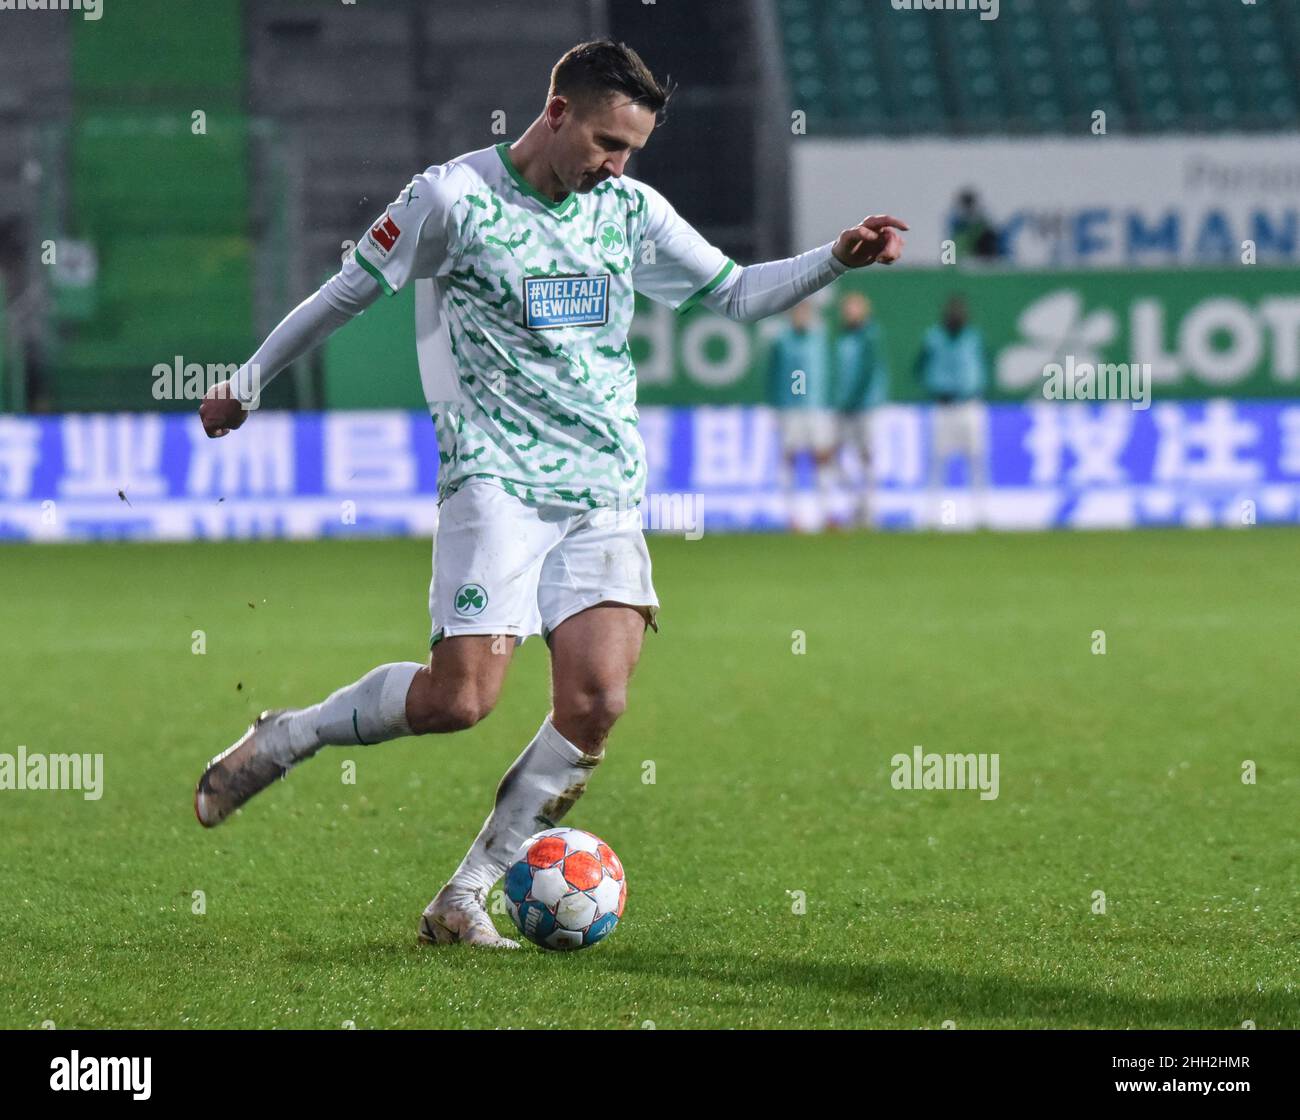 Germany ,Fuerth, Sportpark Ronhof Thomas Sommer - 22 Jan 2022 - Fussball, 1.Bundesliga - SpVgg Greuther Fuerth vs. FSV Mainz 05  Image: Paul Seguin (SpVgg Greuther Fürth,33) in action.  DFL regulations prohibit any use of photographs as image sequences and or quasi-video Stock Photo